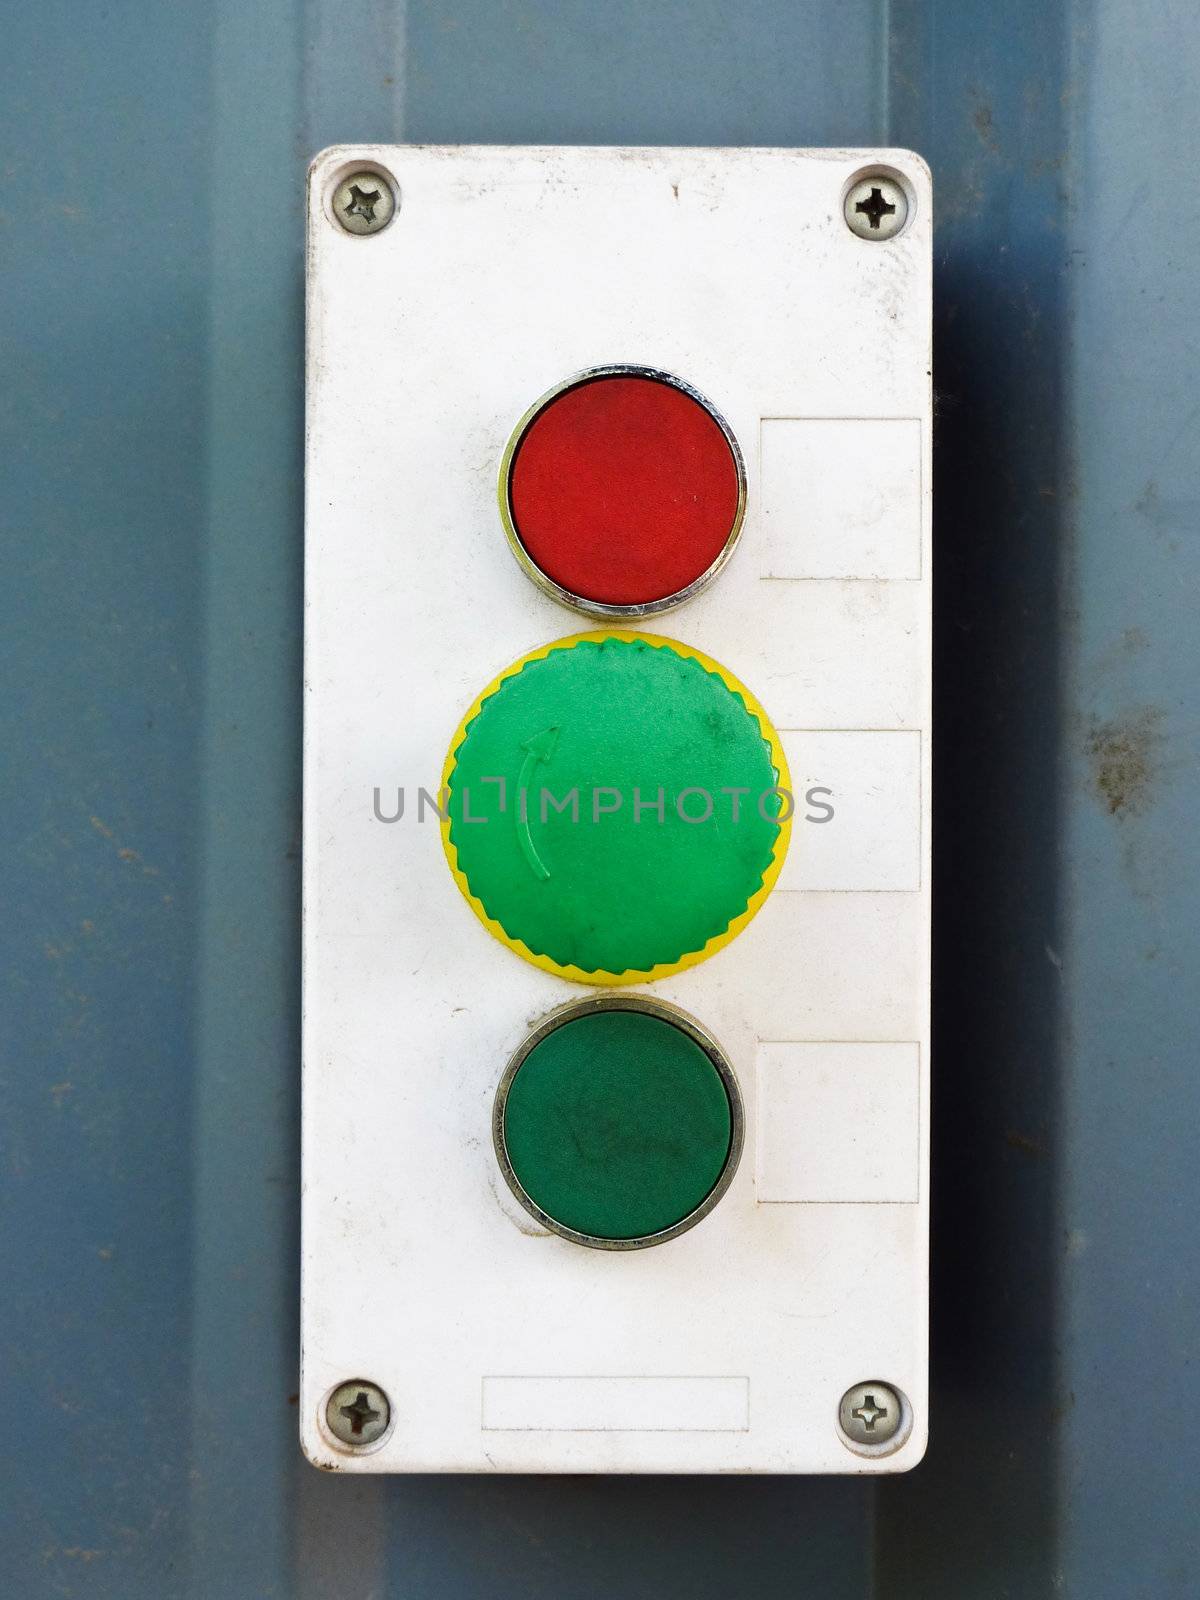 Detail of a switch connected with a factory door used by forklift